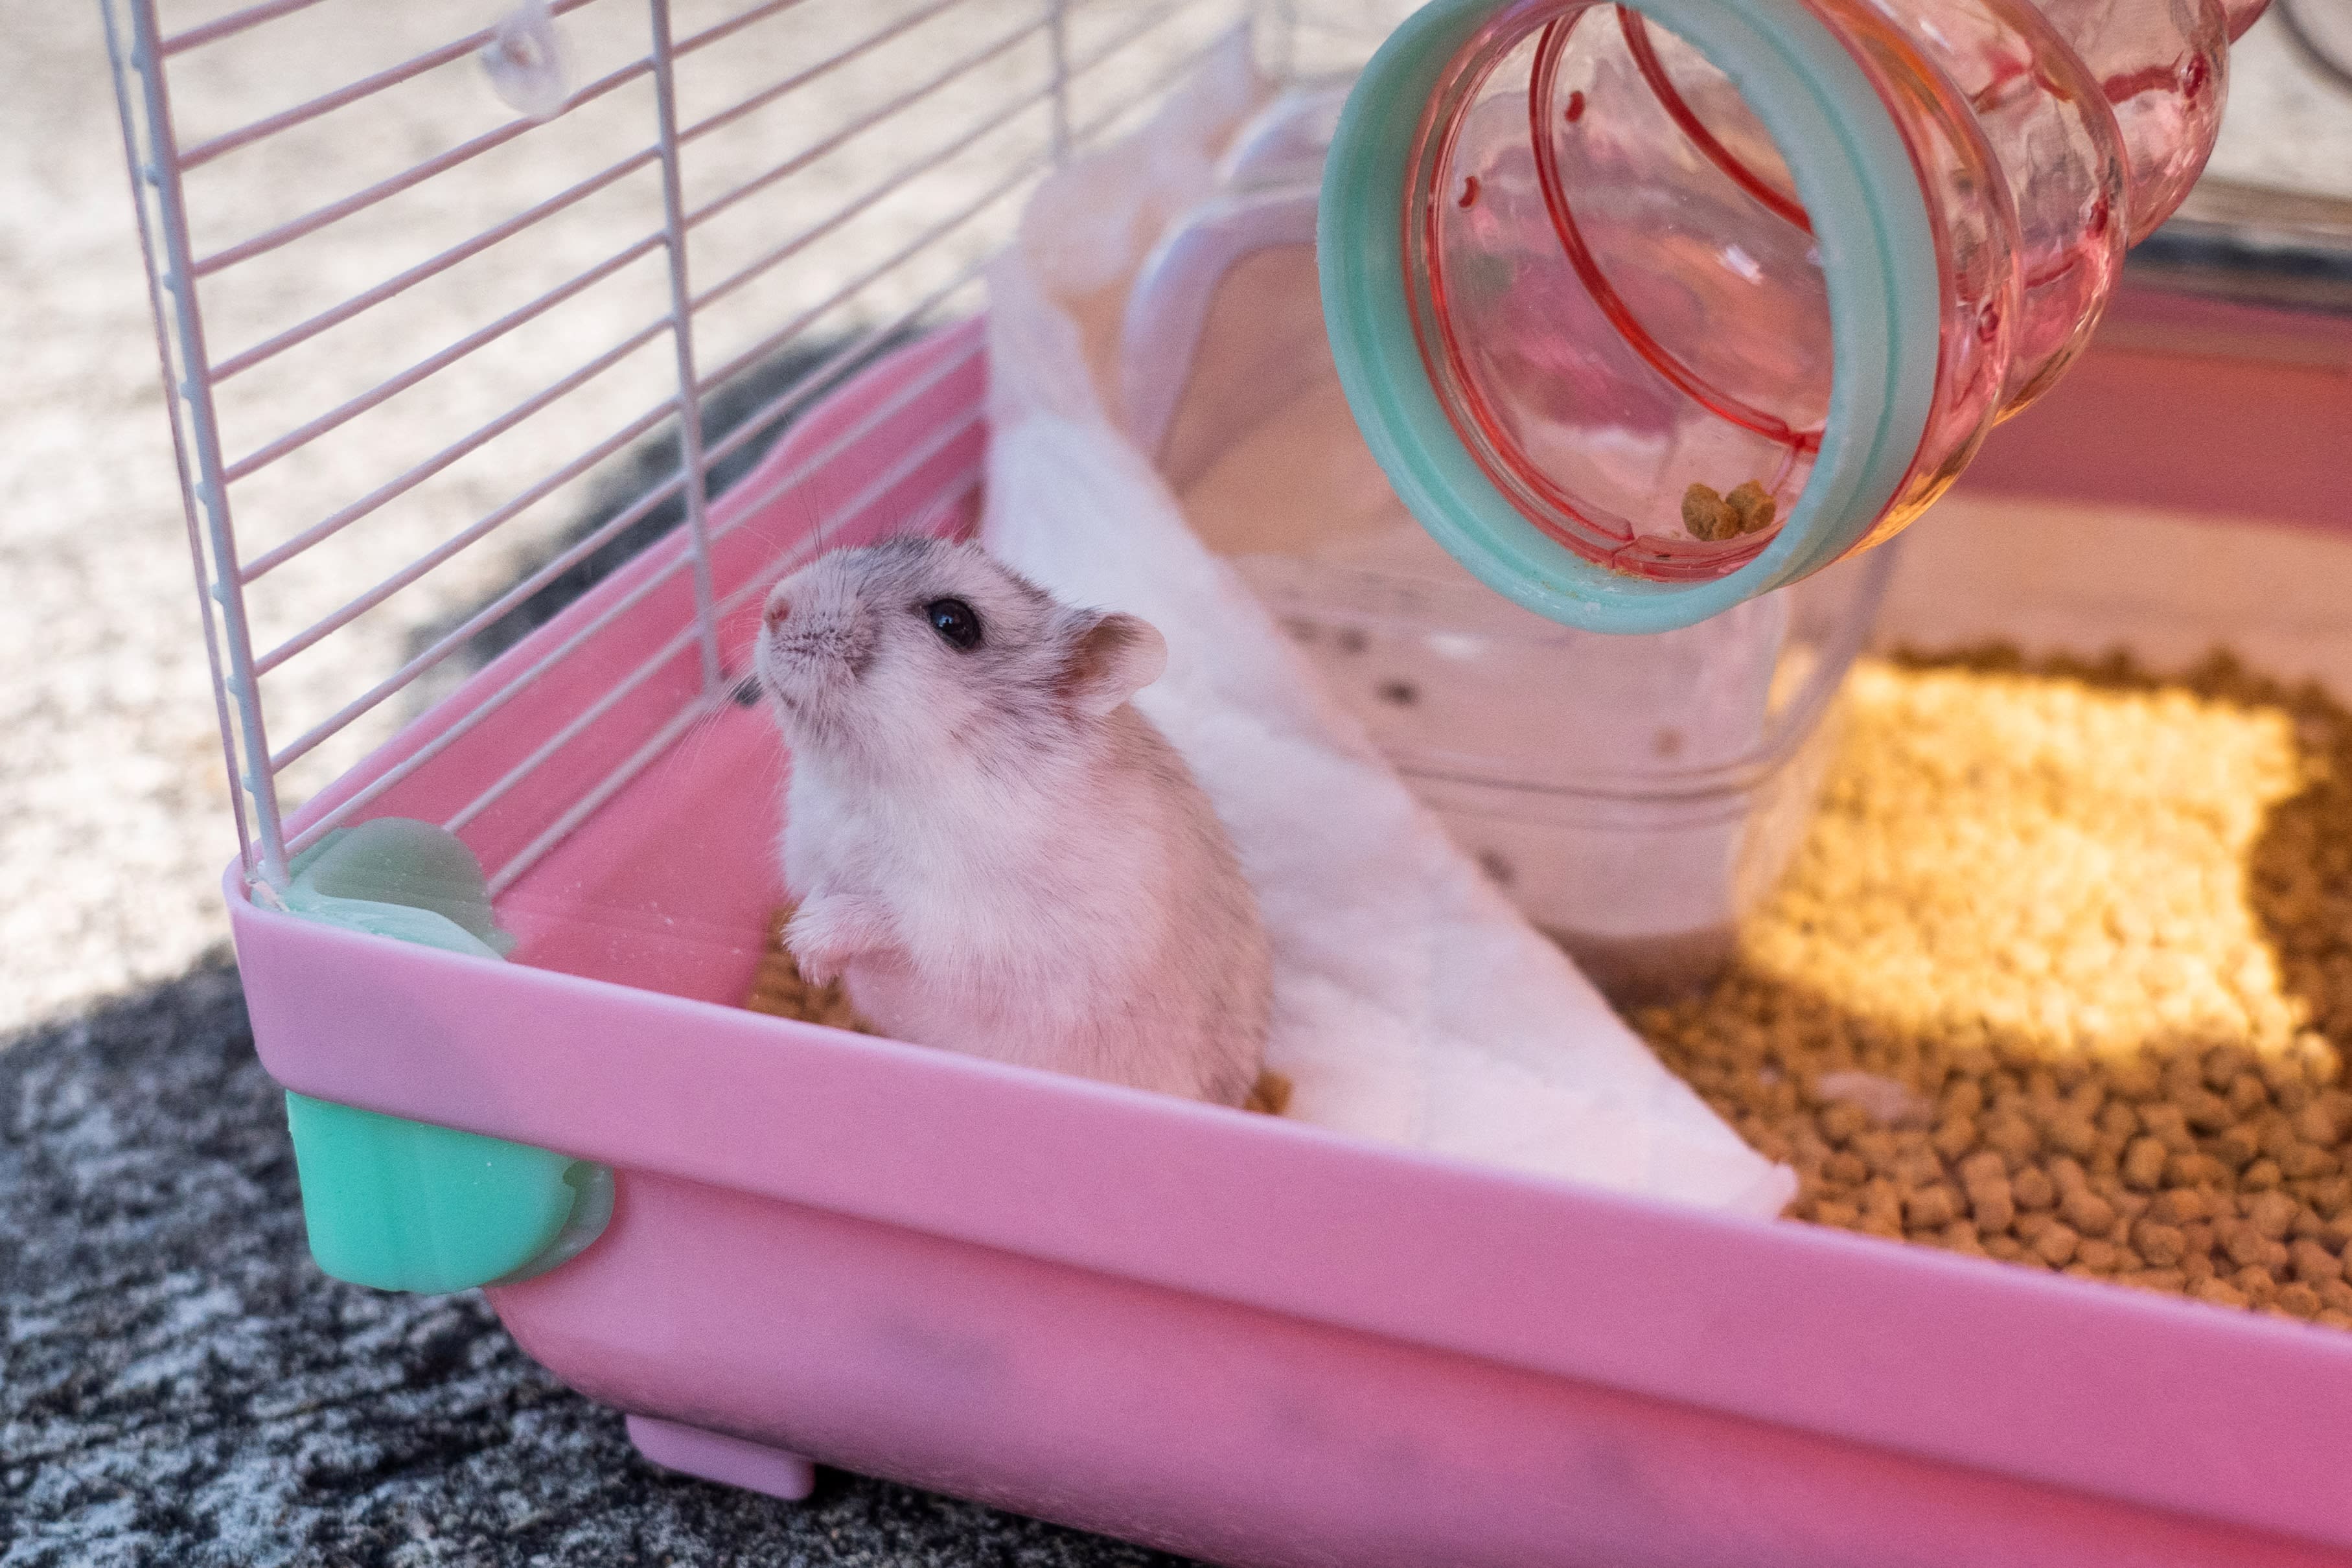 One surrendered Hong Kong hamster tests Covid positive as city lockdown grows